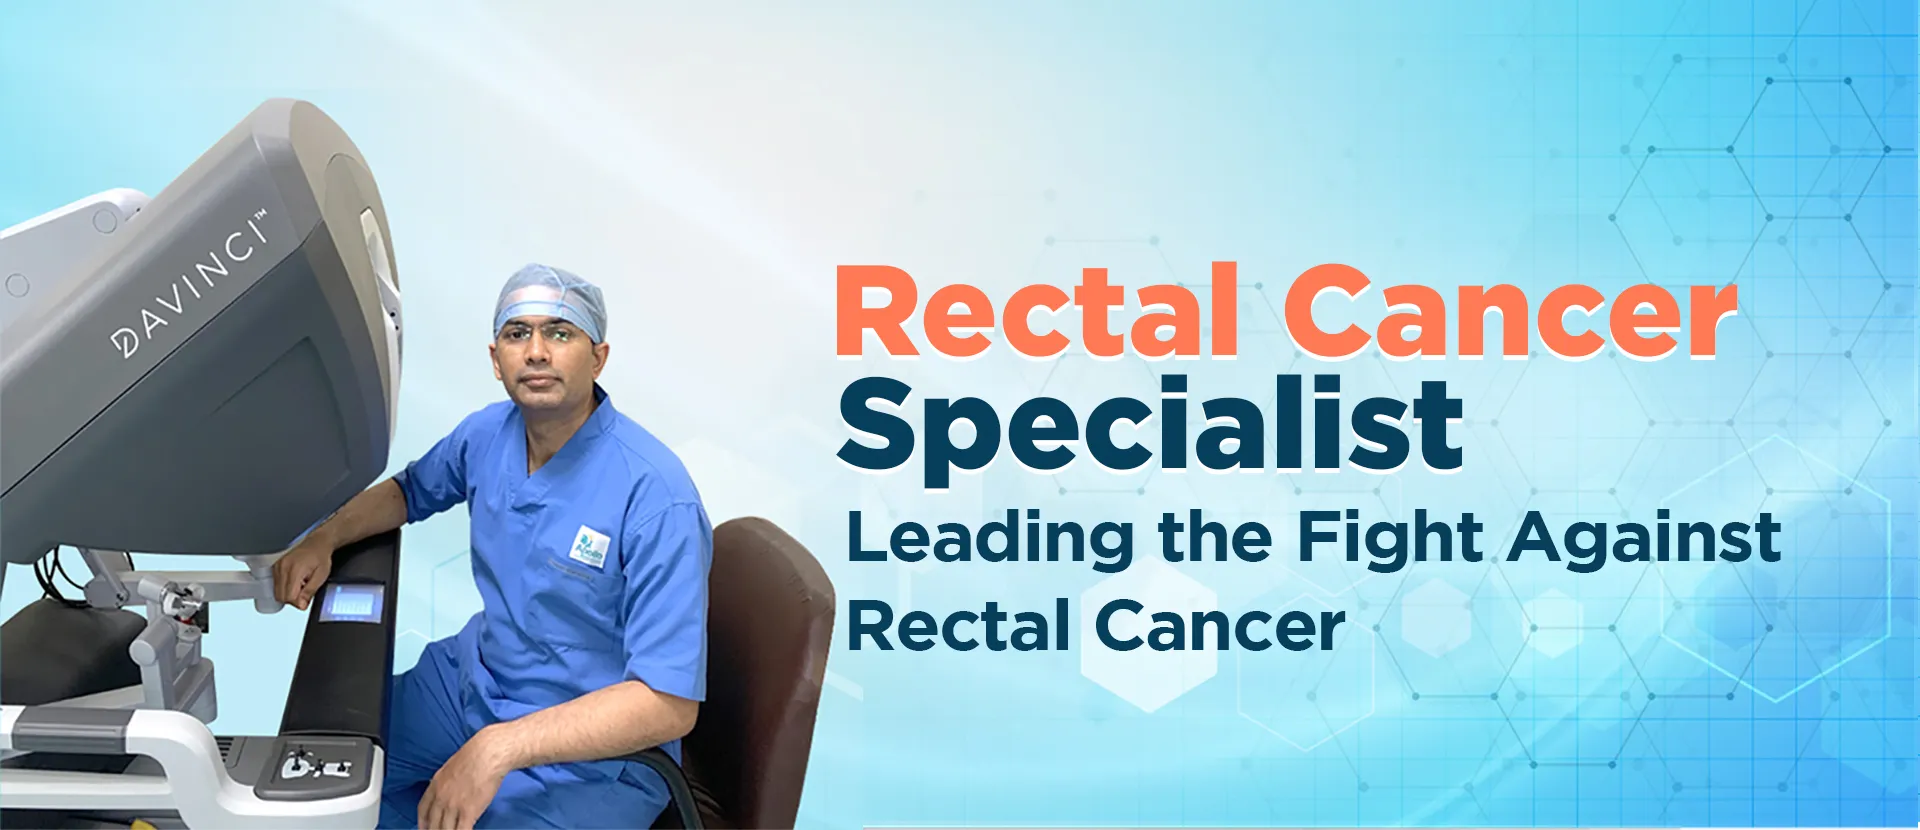 Best rectal cancer doctor and rectal cancer specialist in Ahmedabad, India